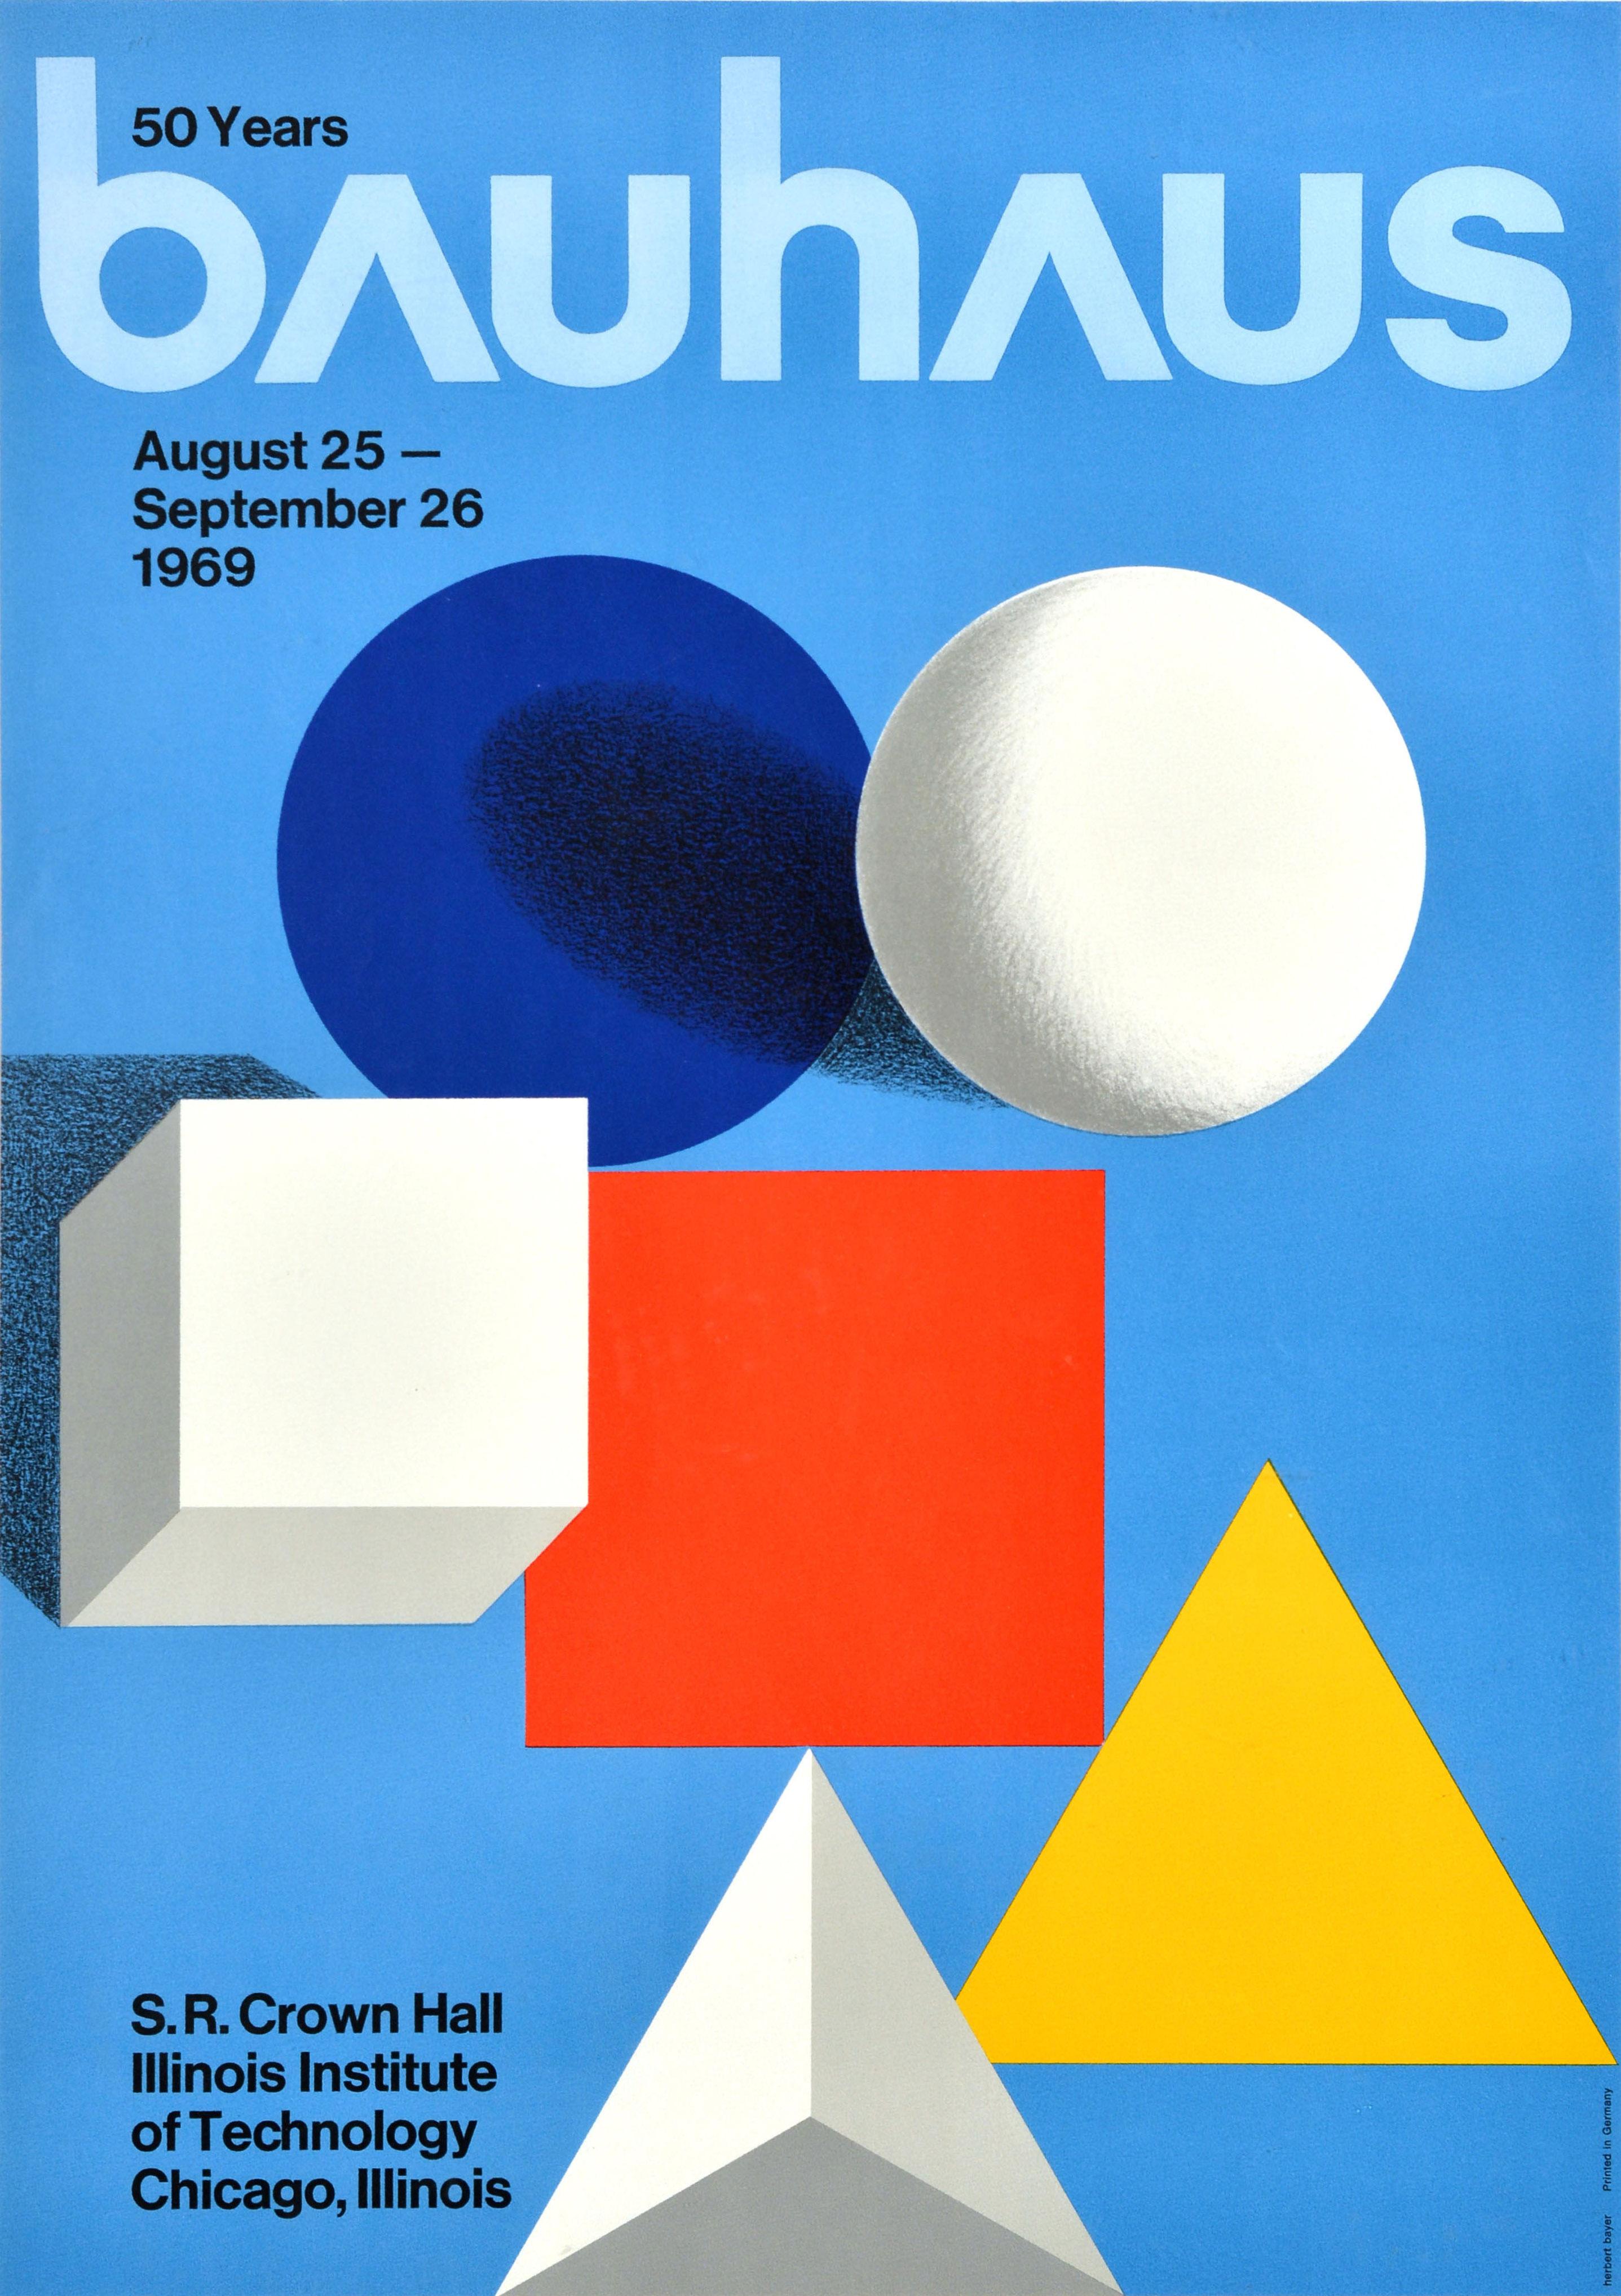 Original vintage exhibition poster for 50 Years Bauhaus held from 25 August to 26 September 1969 held at the S.R. Crown Hall Illinois Institute of Technology Chicago (IIT Illinois Tech; founded 1890) featuring minimalist composition including a blue